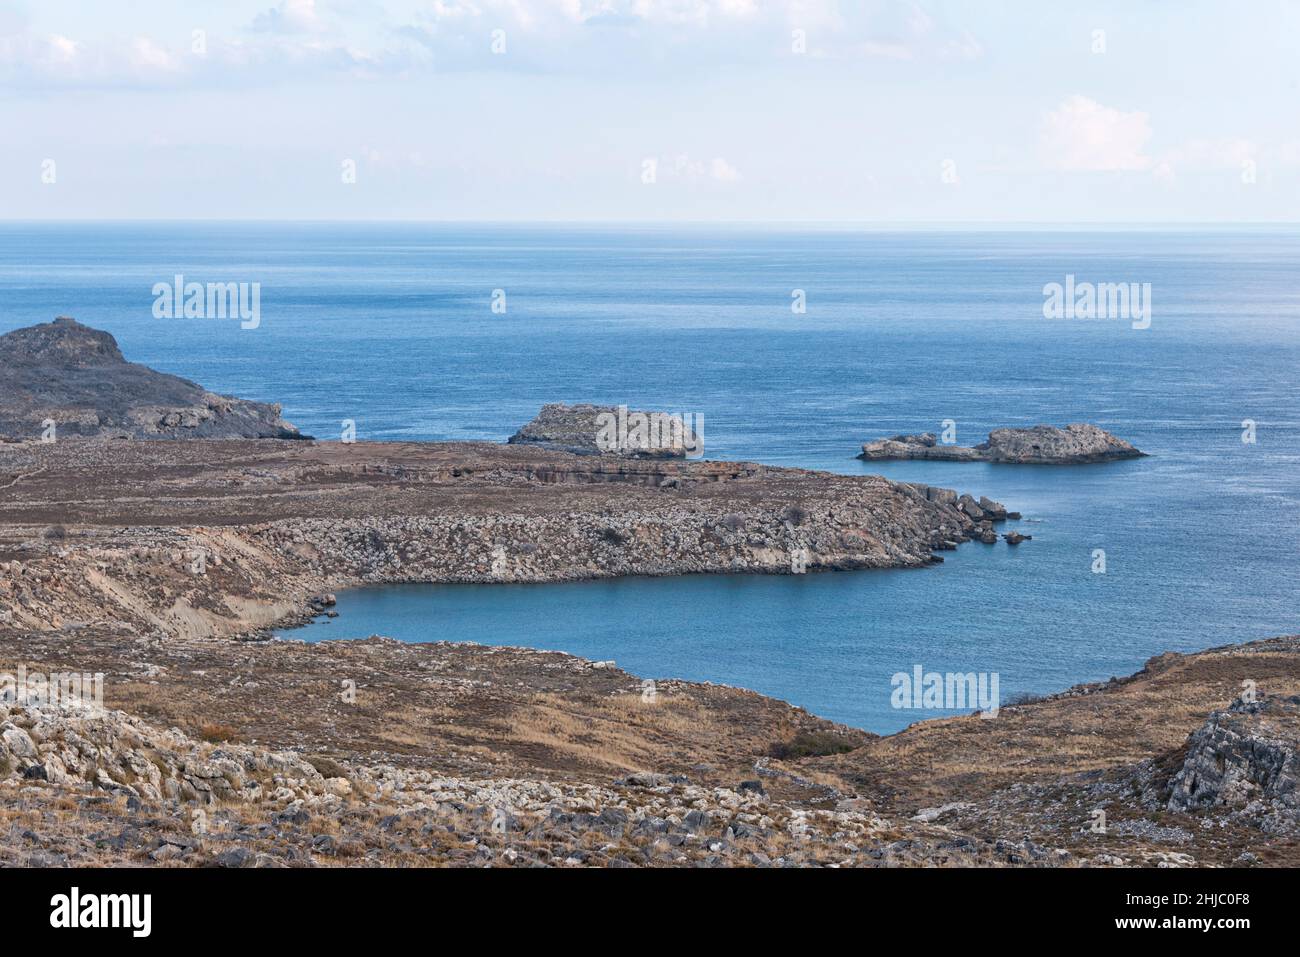 Landscape of a barren land meeting the sea Stock Photo